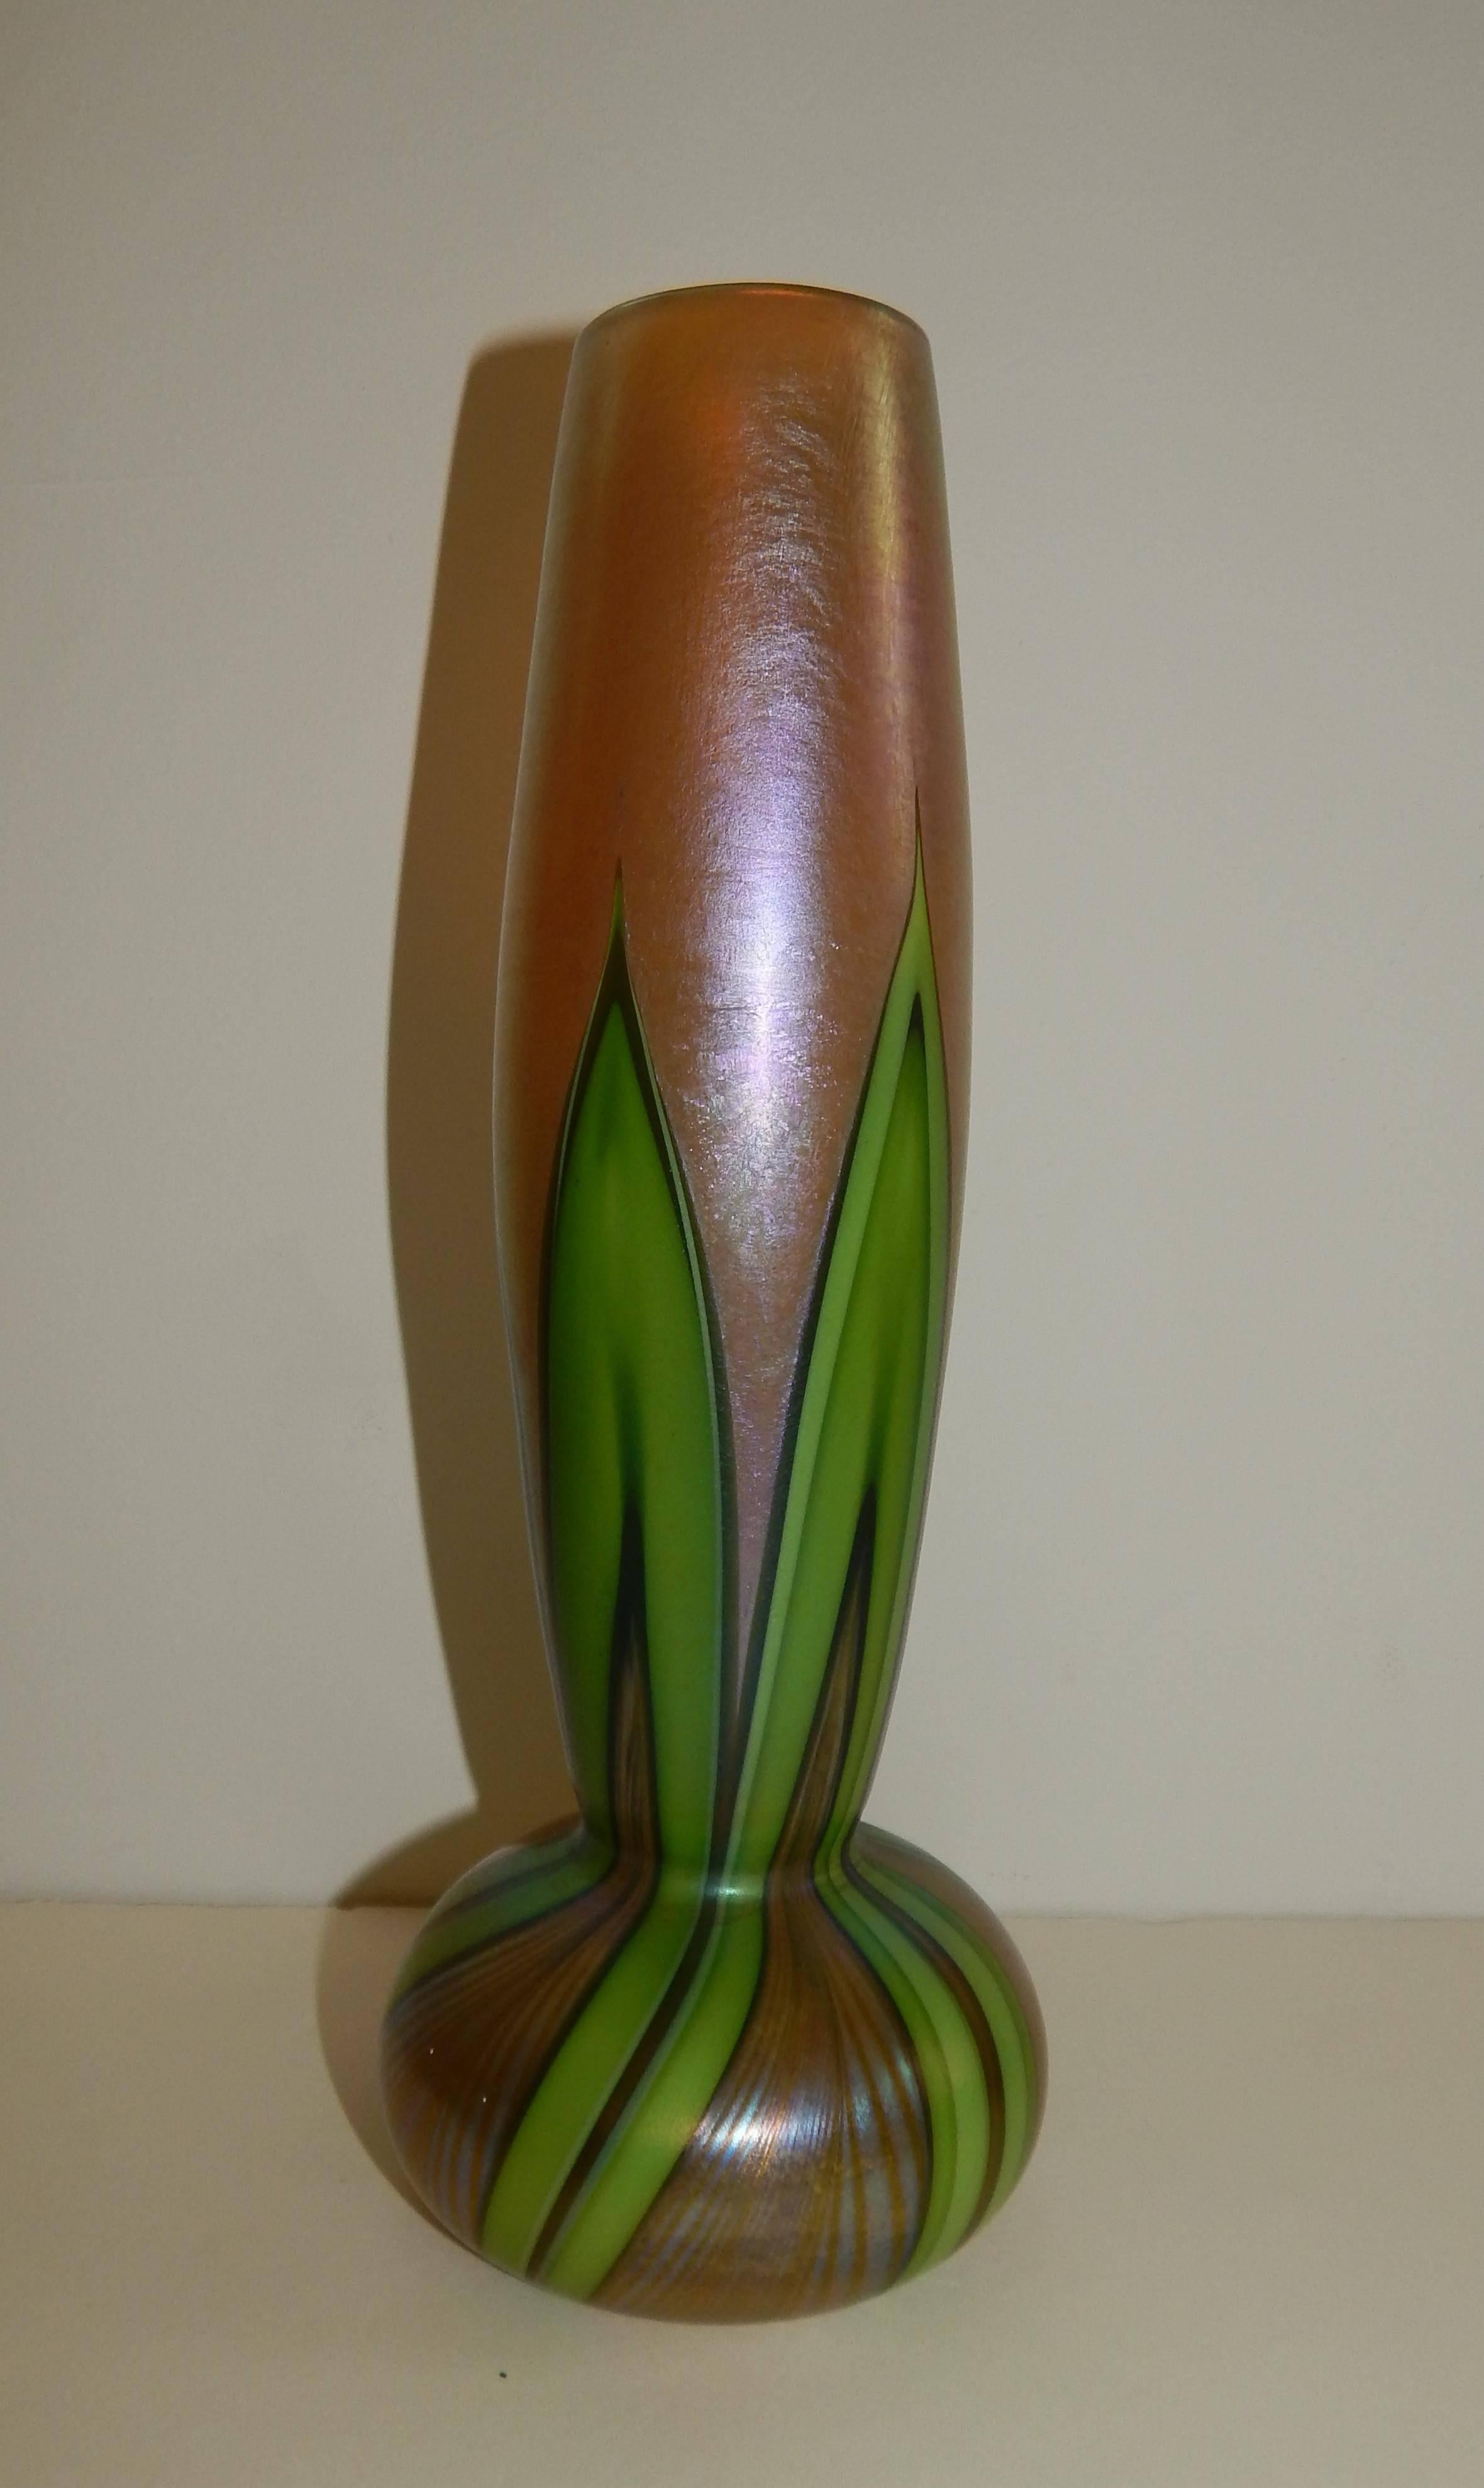 Iridized gold Favrile onion form vase from Tiffany Studios with green 
pulled feather design.

 Marked L.C. Tiffany, Favrile and 8041 H 
 Favrile glass was patented by Louis Comfort Tiffany in 1894.
This vase has great color and is in mint